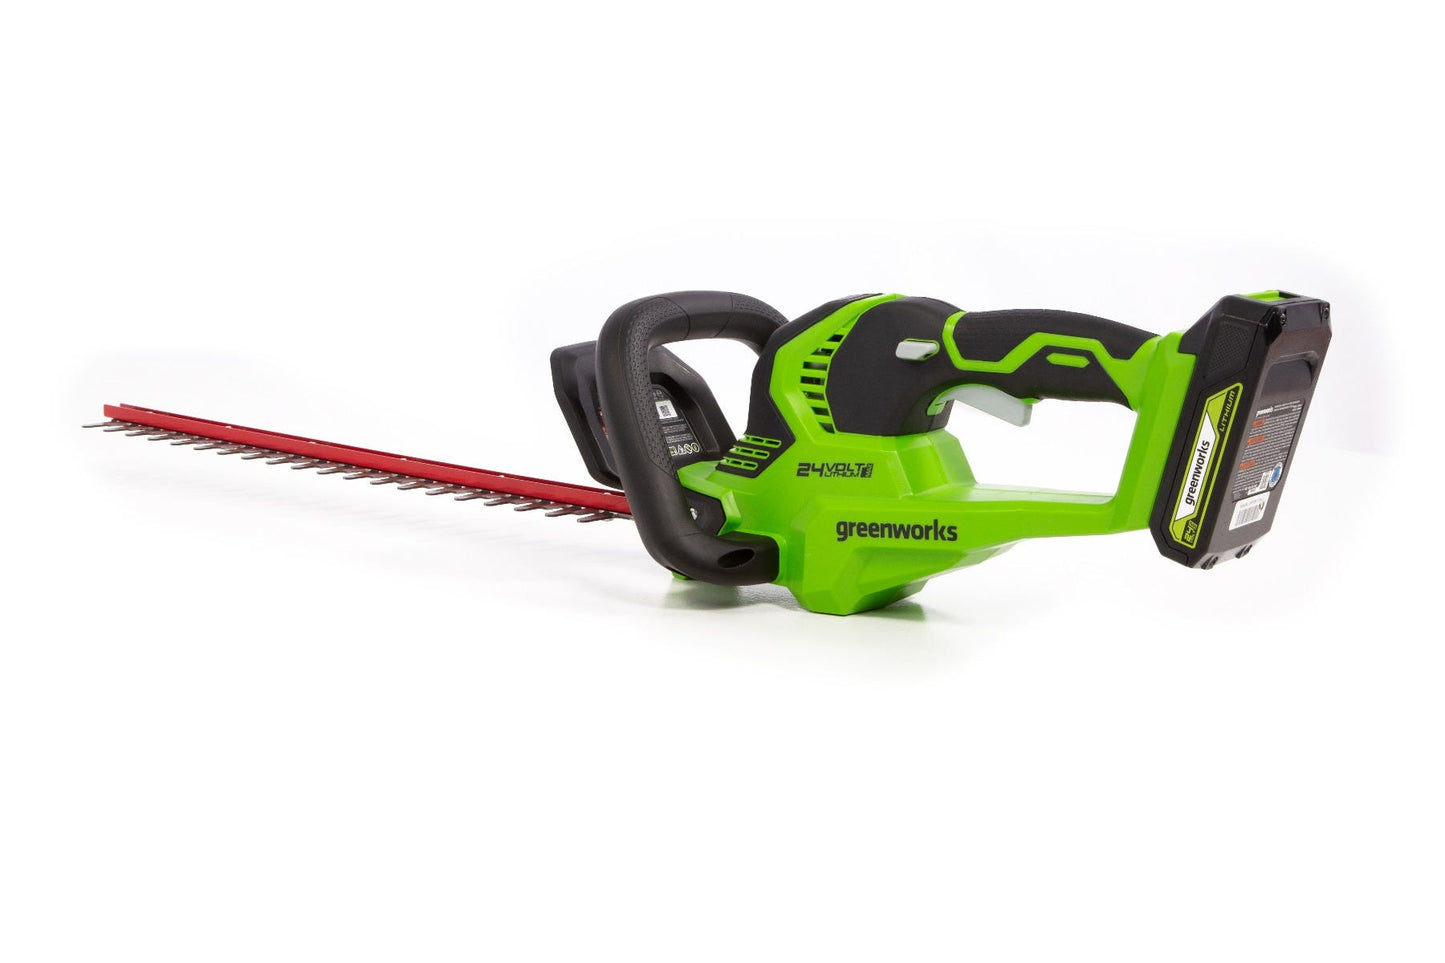 24H20 24-Volt 22" Hedge Trimmer (with Battery and Charger)